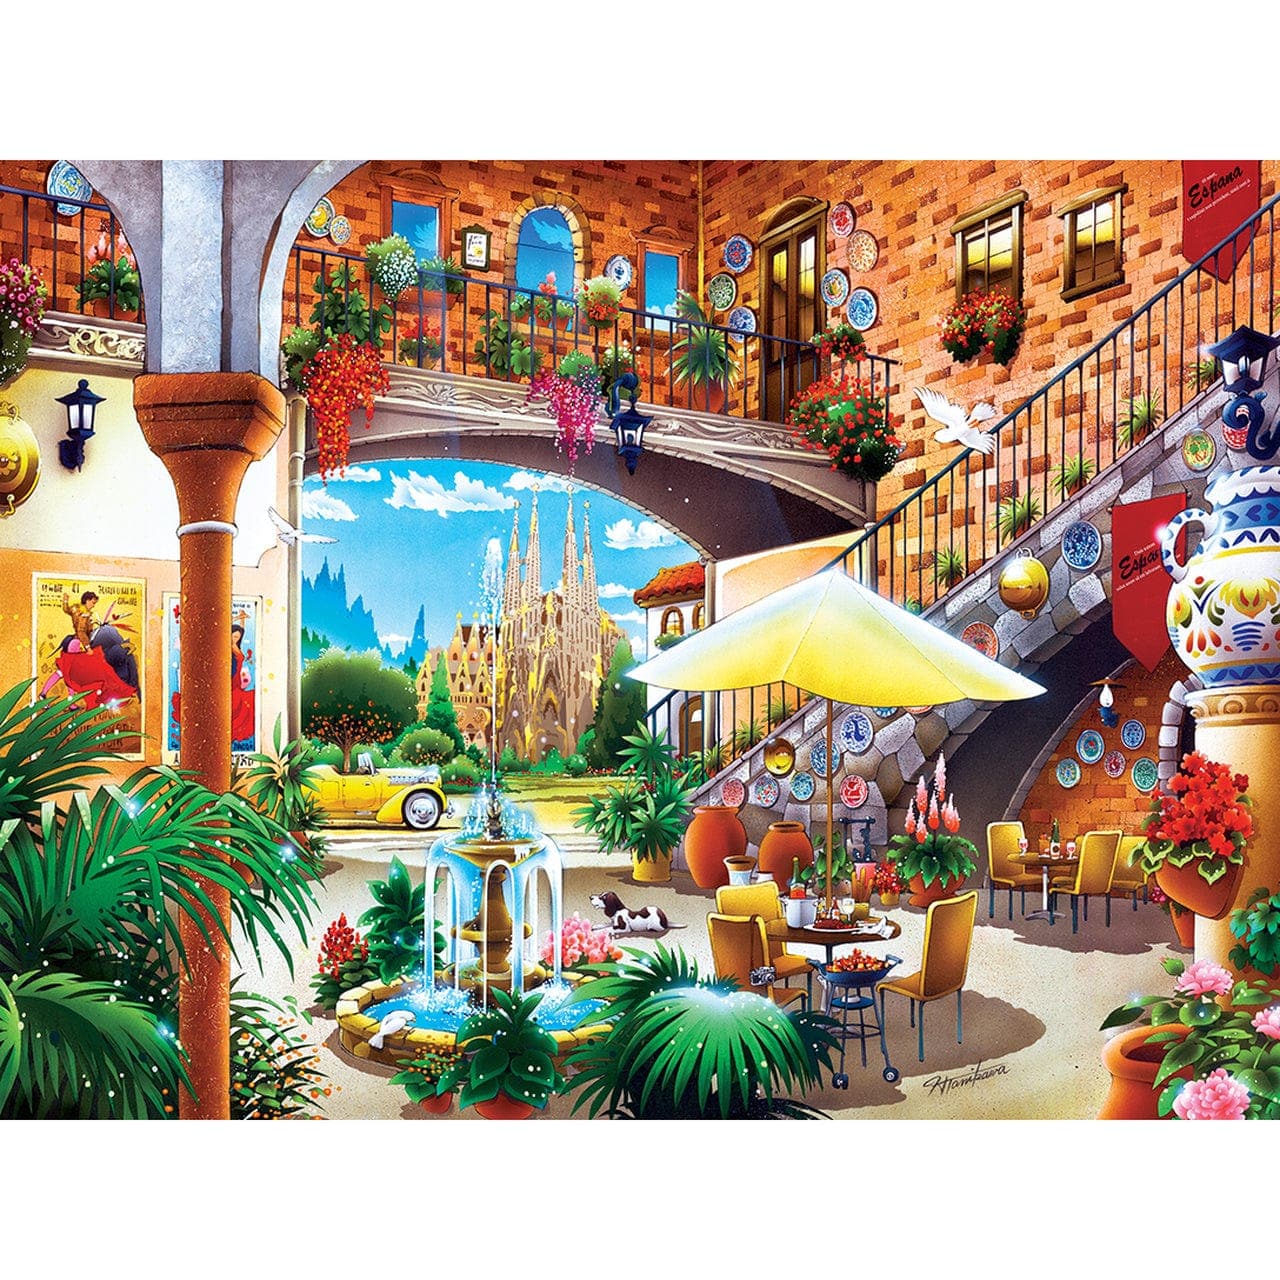 MasterPieces-Travel Diary - Barcelona - 550 Piece Puzzle-31975-Legacy Toys